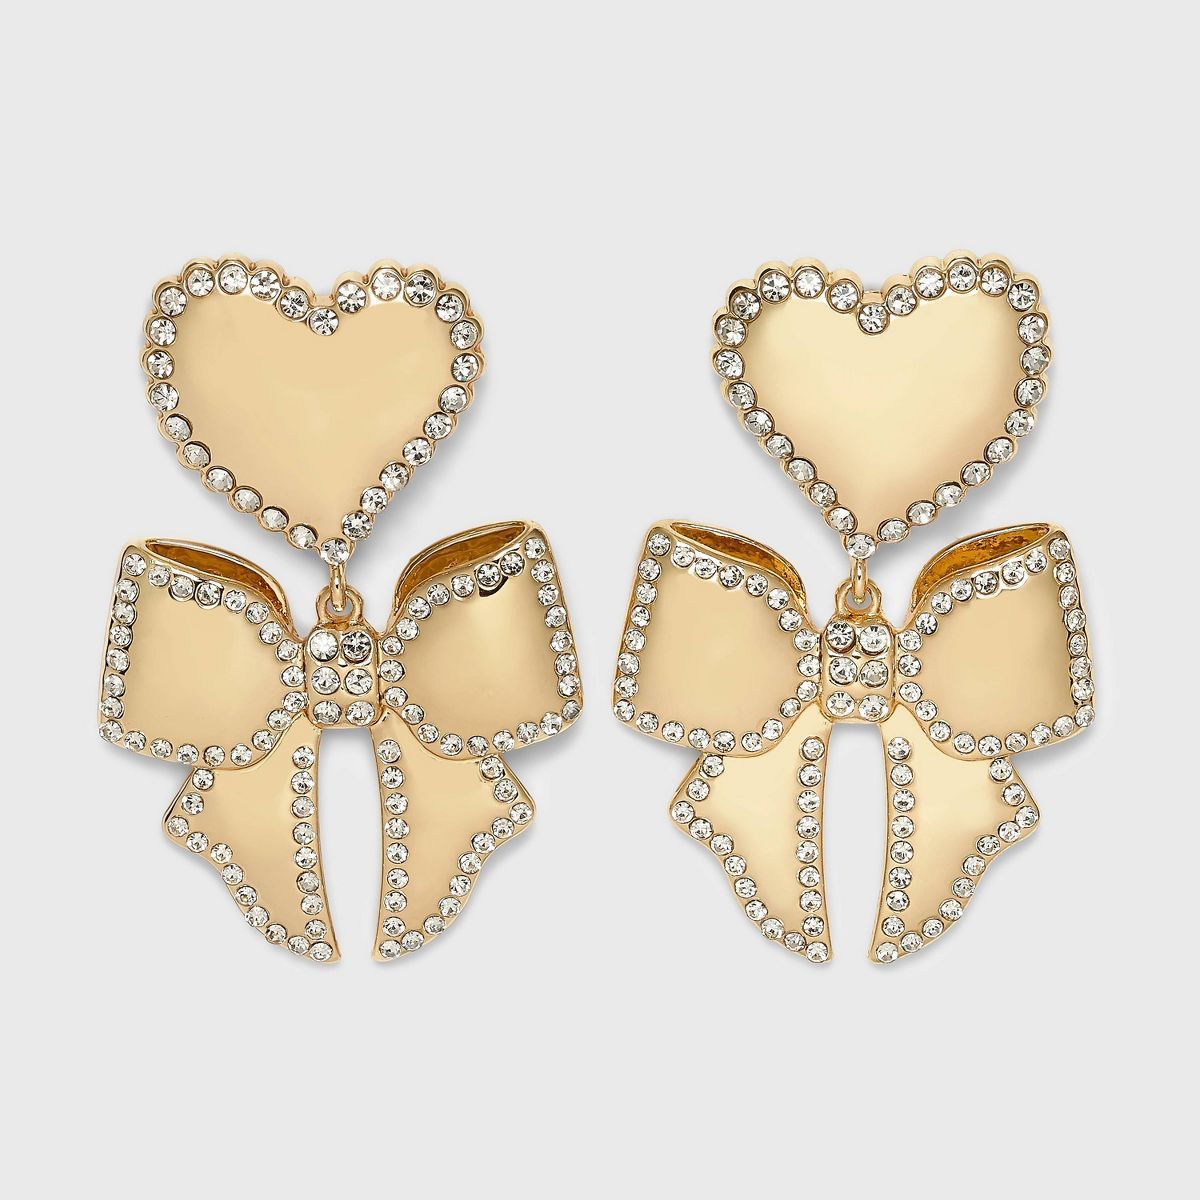 SUGARFIX by BaubleBar X's and Bows Drop Earrings | Target